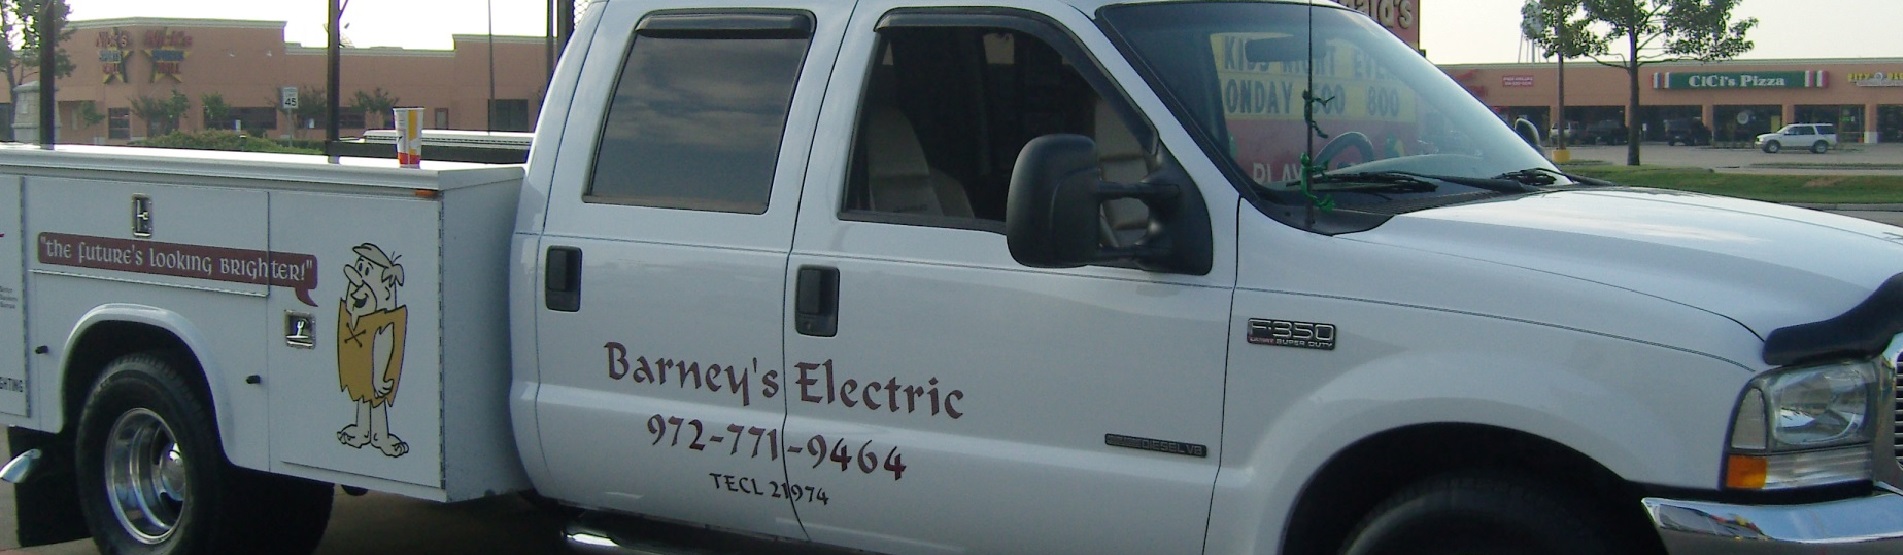 electrical contractor Royce City texas Electrician Royce City TX Barney's Electric Full Service Electrician Residential Commercial Retail and New Construction Wiring Repair Installation Service 24 Hour Emergency Services Master Electrician Rockwall Texas